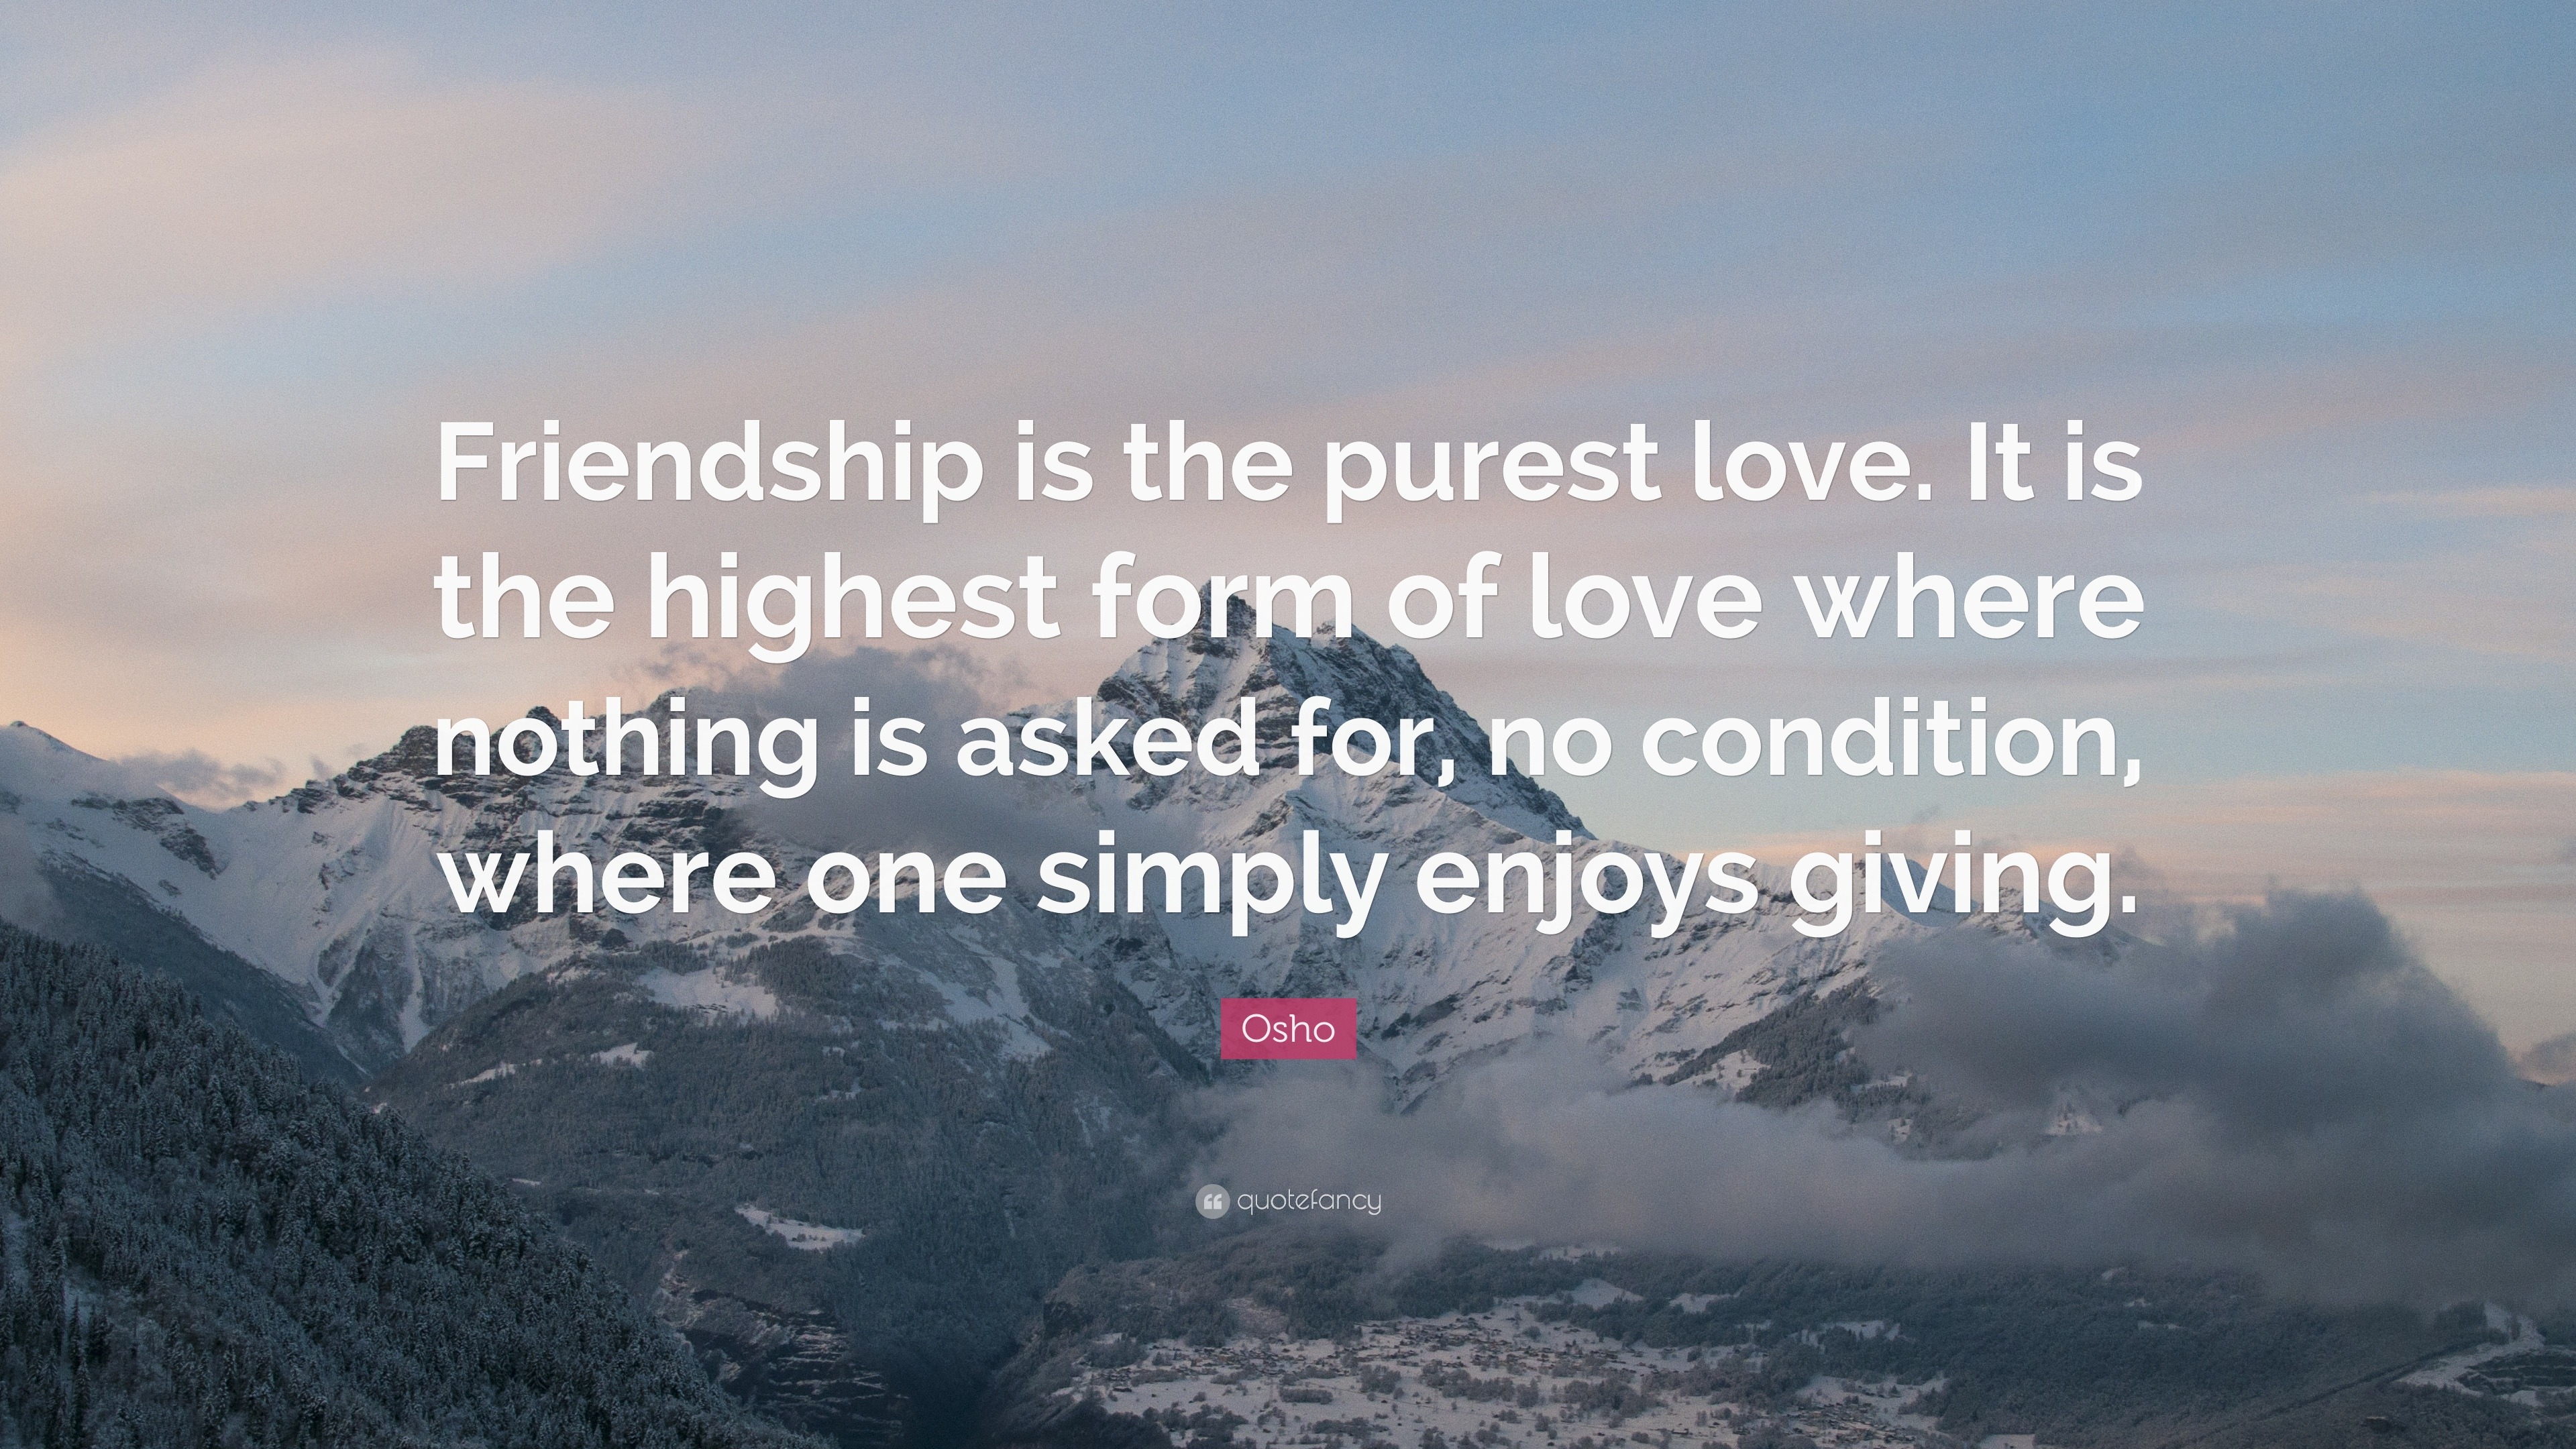 Osho Quote “Friendship is the purest love It is the highest form of